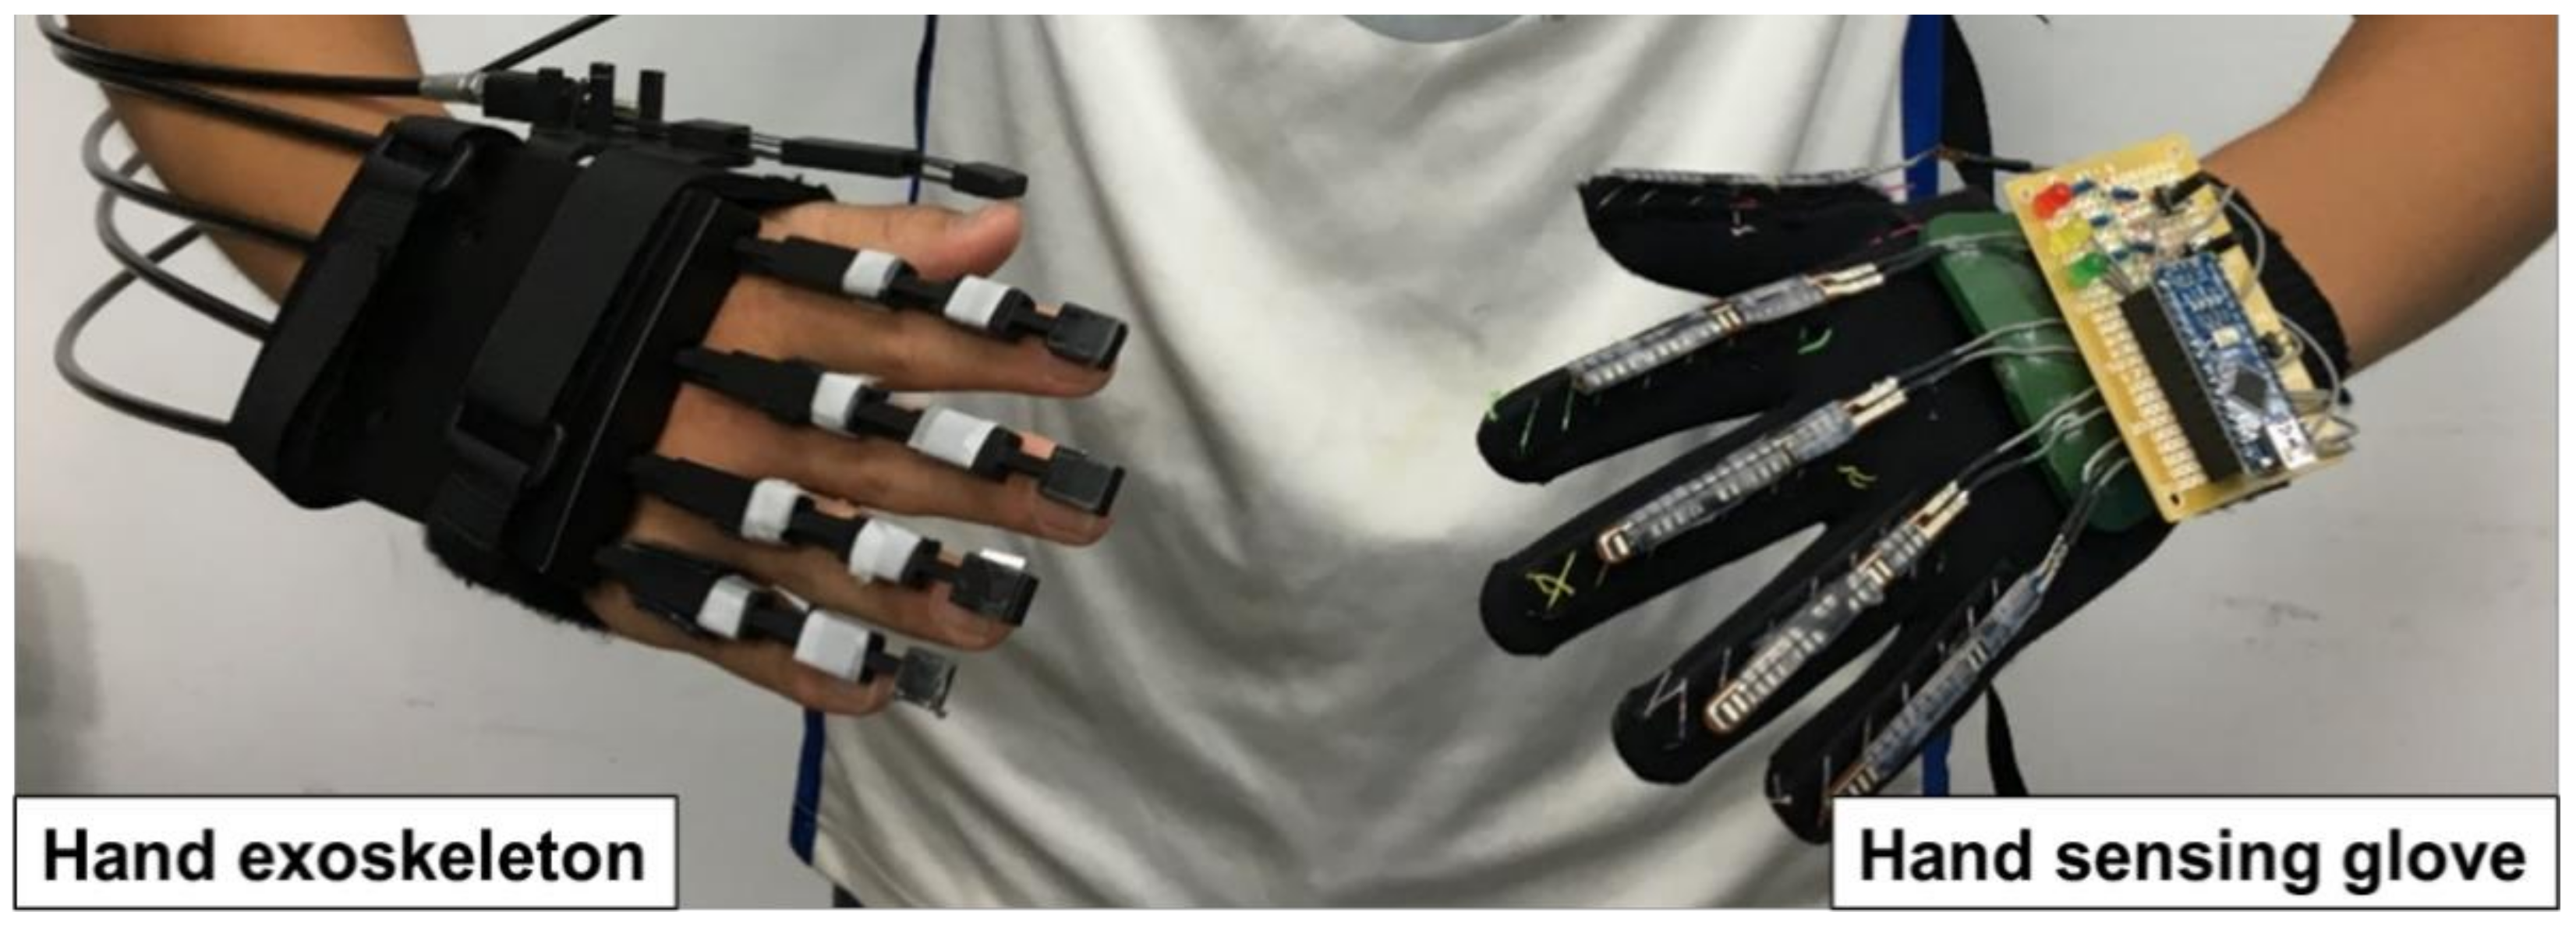 Biosensors | Free Full-Text | An Instrumented Glove-Controlled Portable Hand -Exoskeleton for Bilateral Hand Rehabilitation